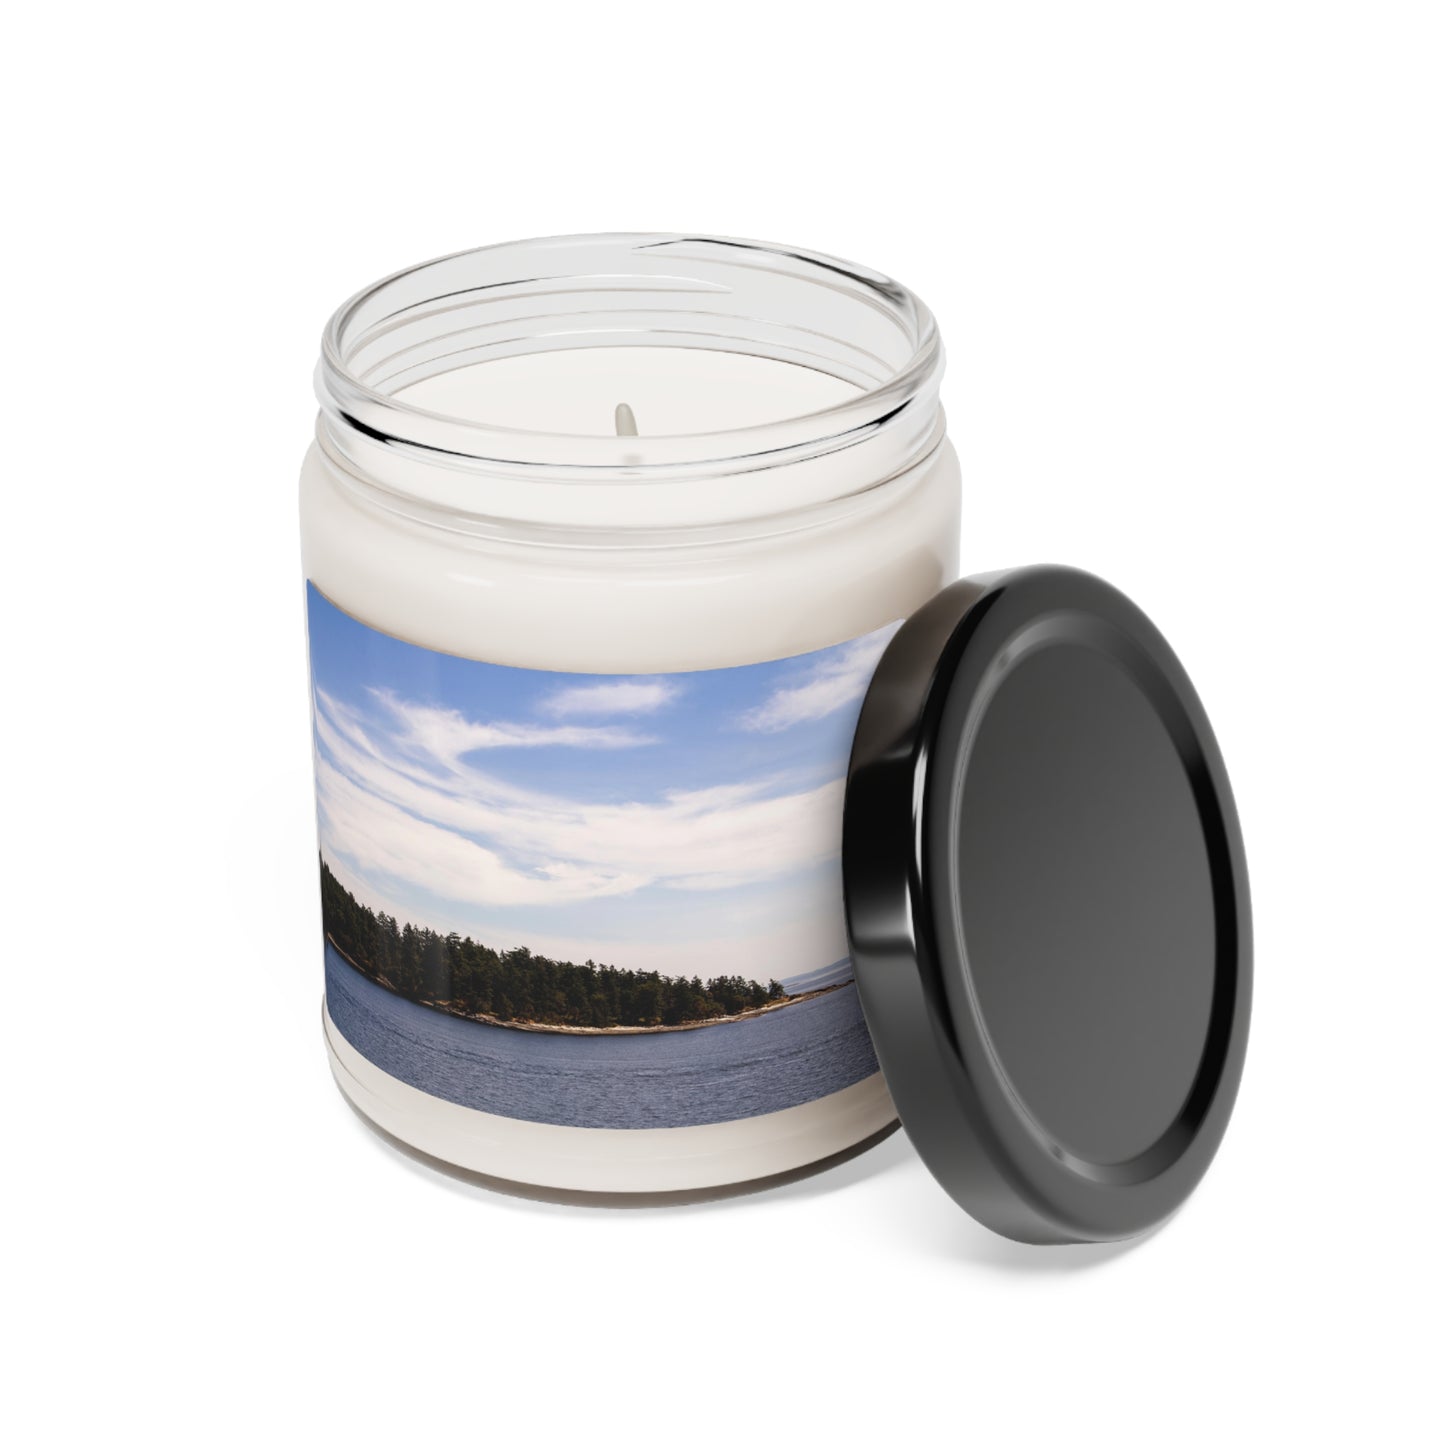 Ocean Water Beach Scene Scented Soy Candle, 9oz